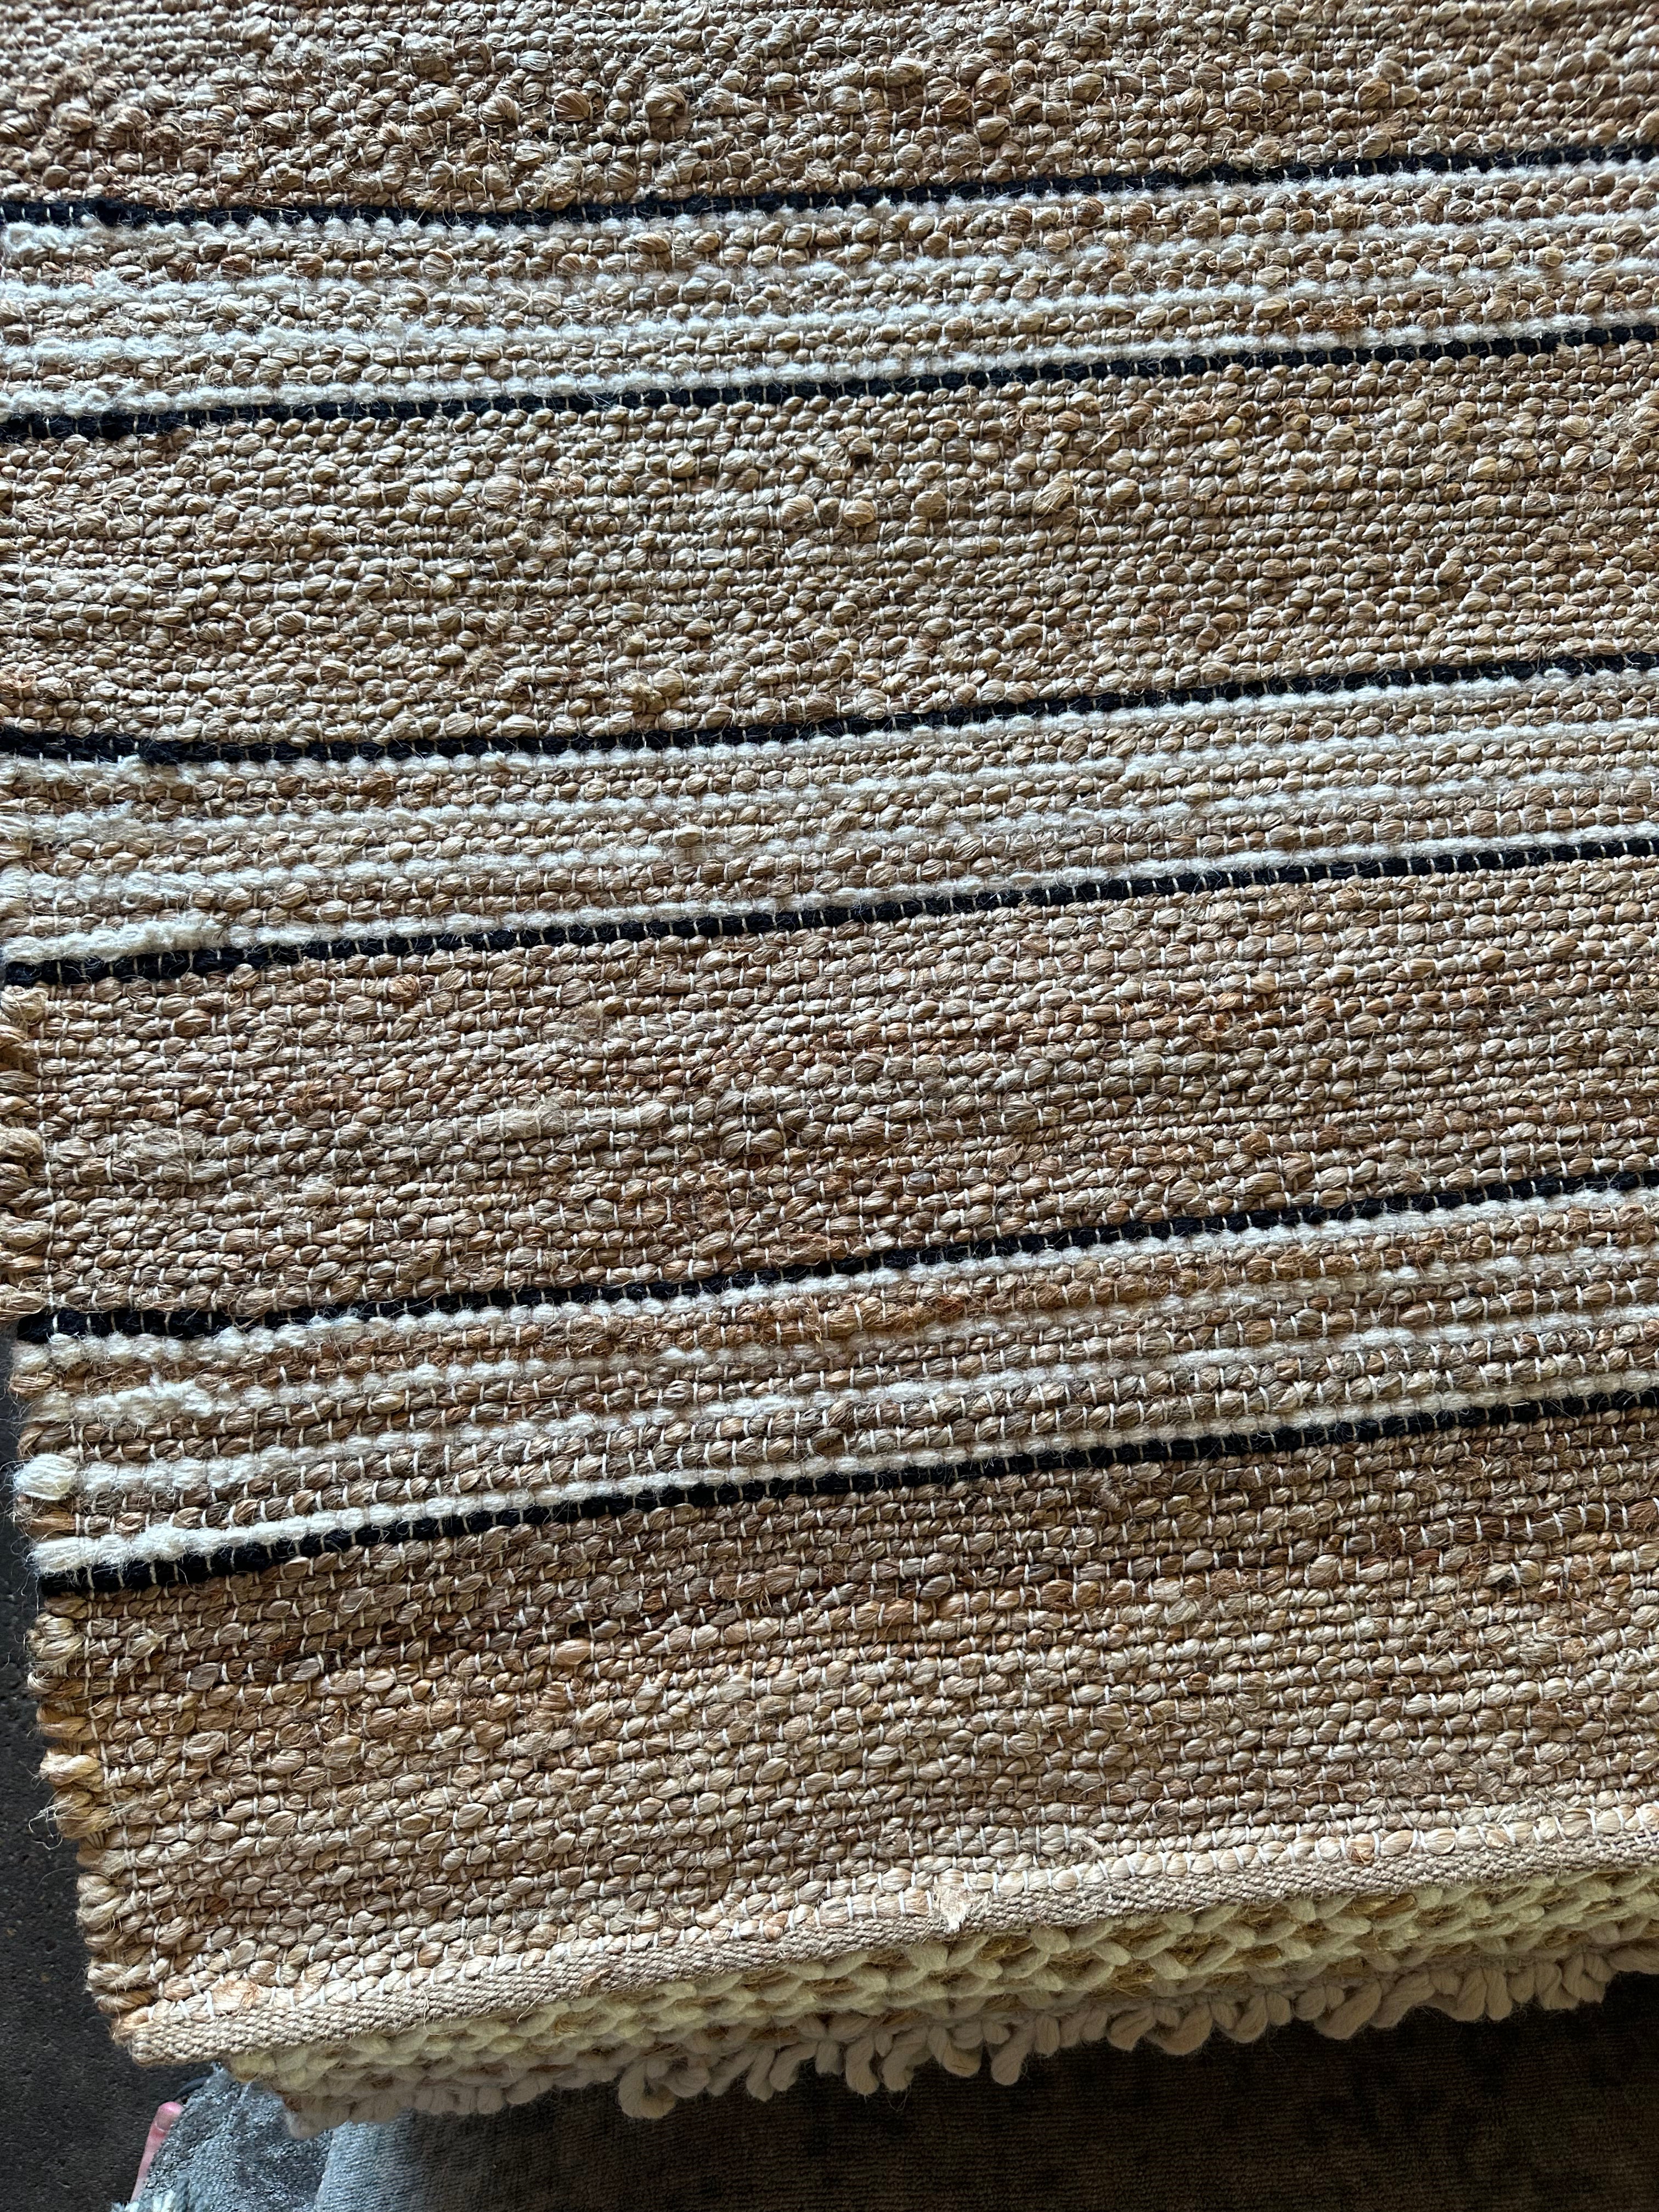 Count Basie Handwoven Striped Natural Jute Rug (Multiple Sizes) CLEARANCE